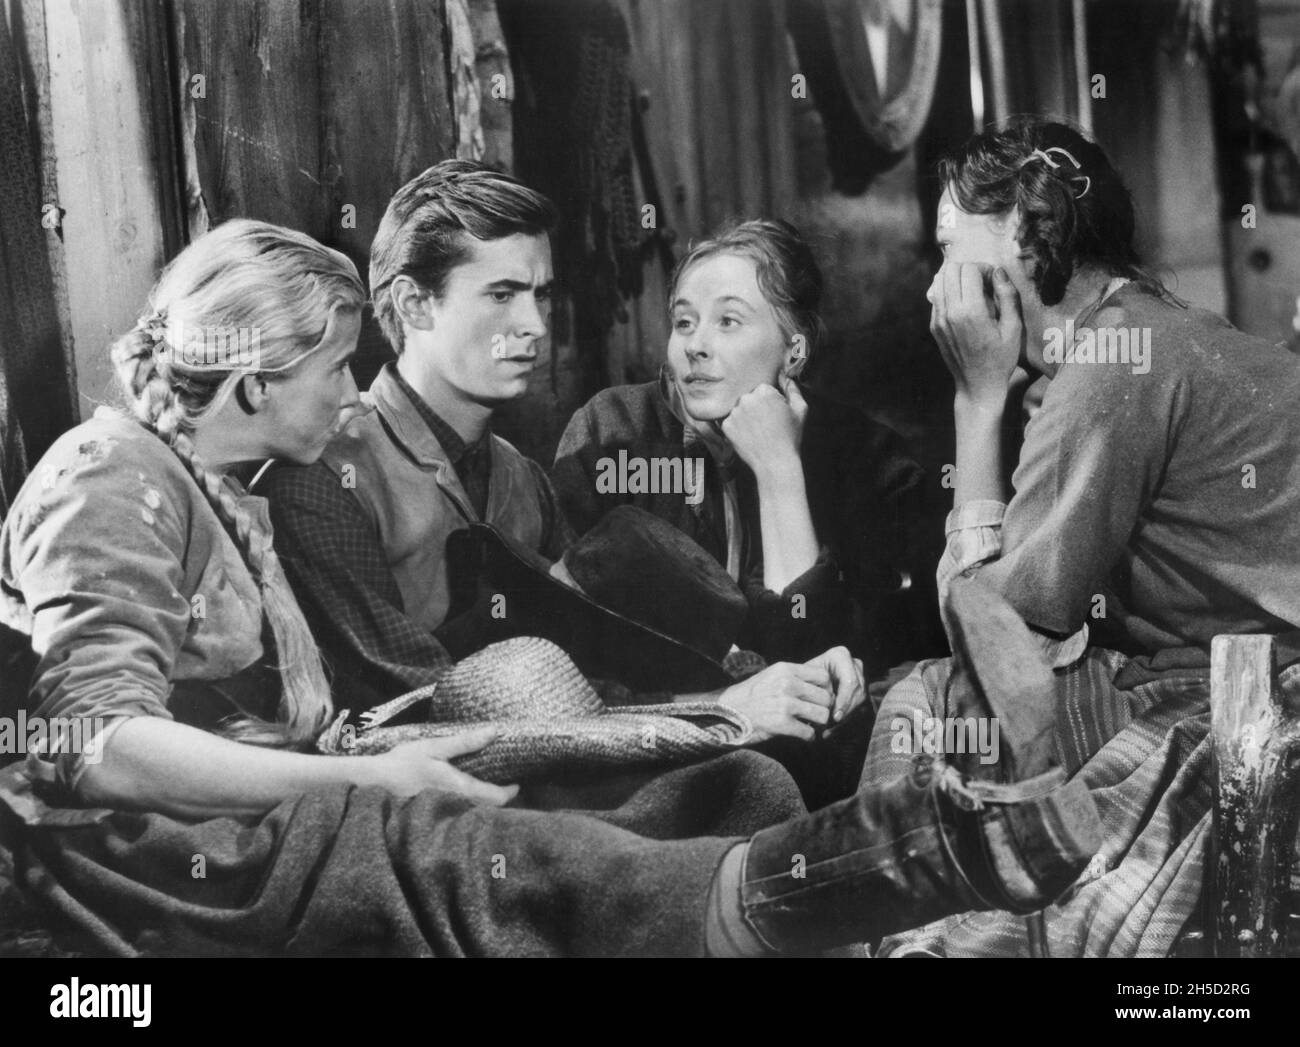 Anthony Perkins, Marjorie Durant, Frances Farwell, Edna Skinner, On-Set of the Film, 'Friendly Persuasion', Allied Artists, 1956 Stockfoto